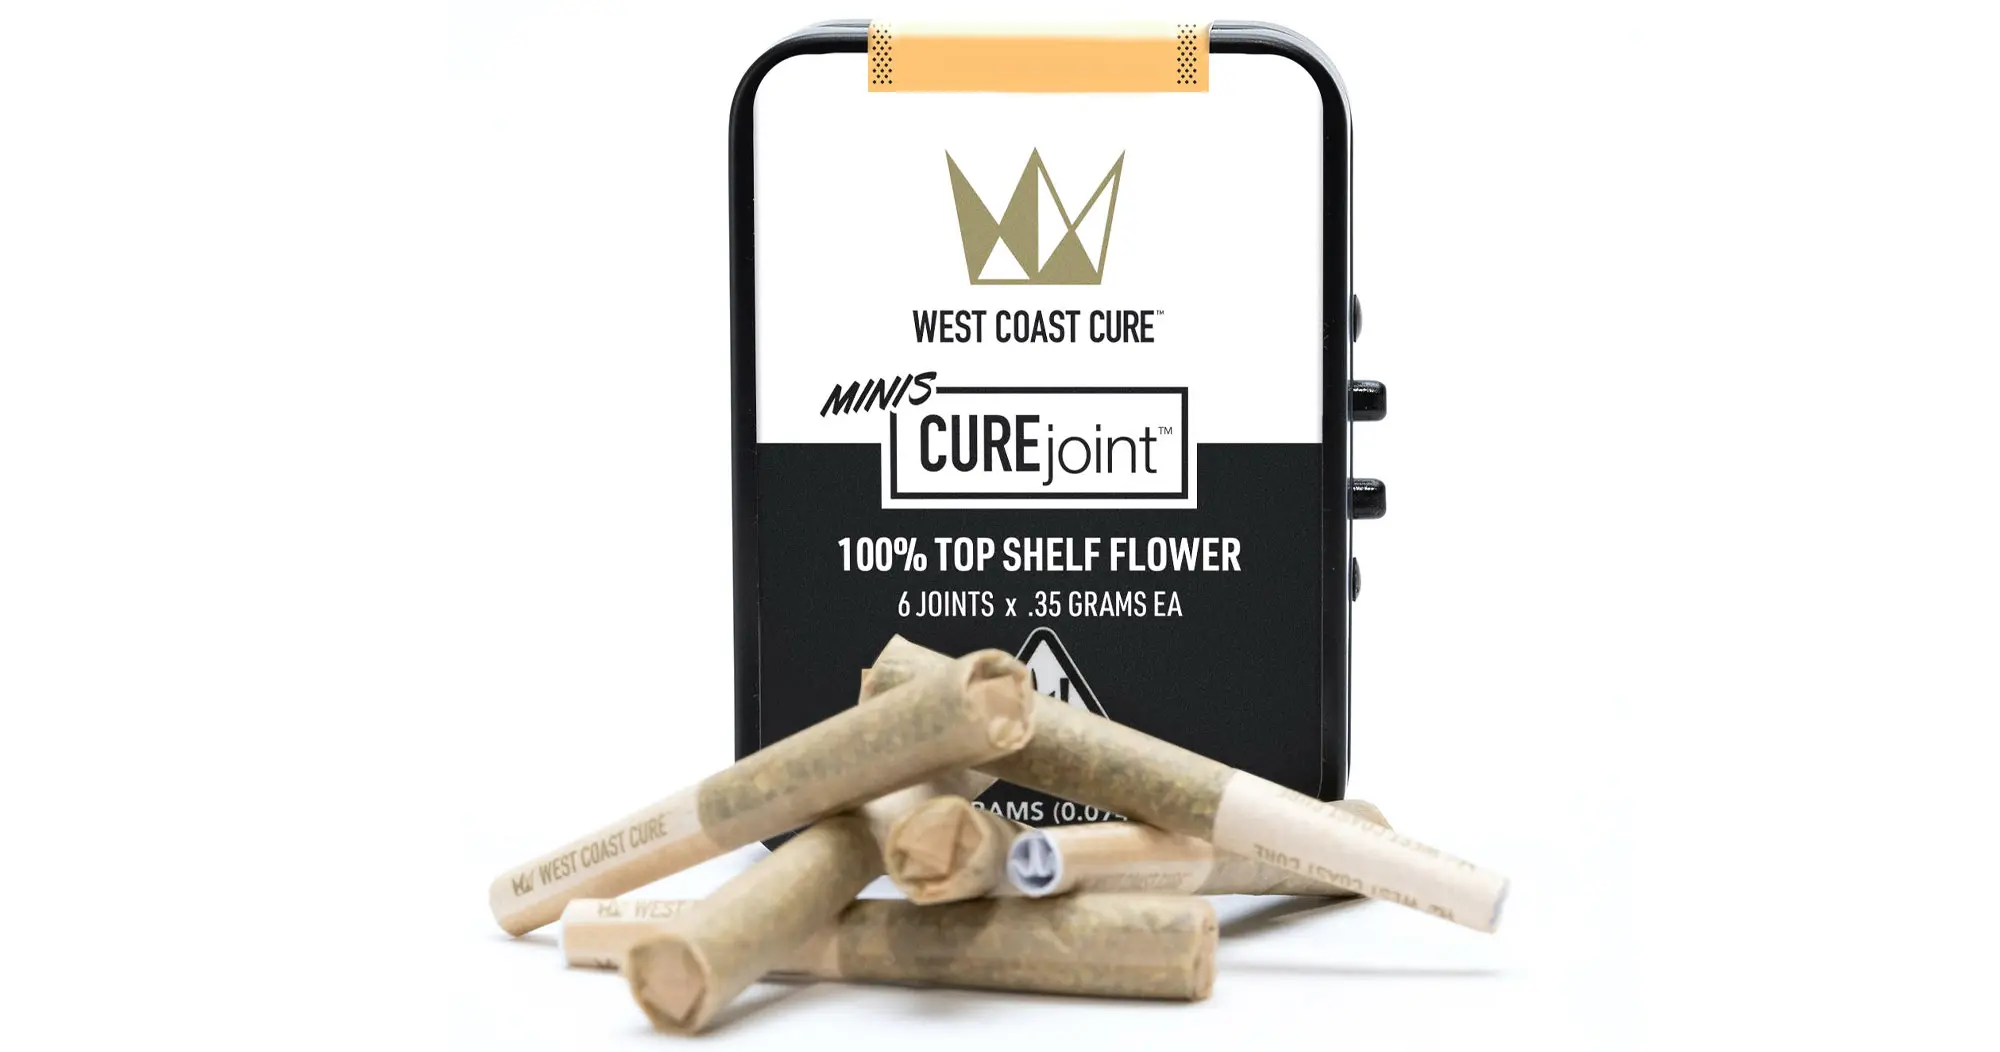 Cookie Mix CUREjoint Mini Pre-Roll Pack